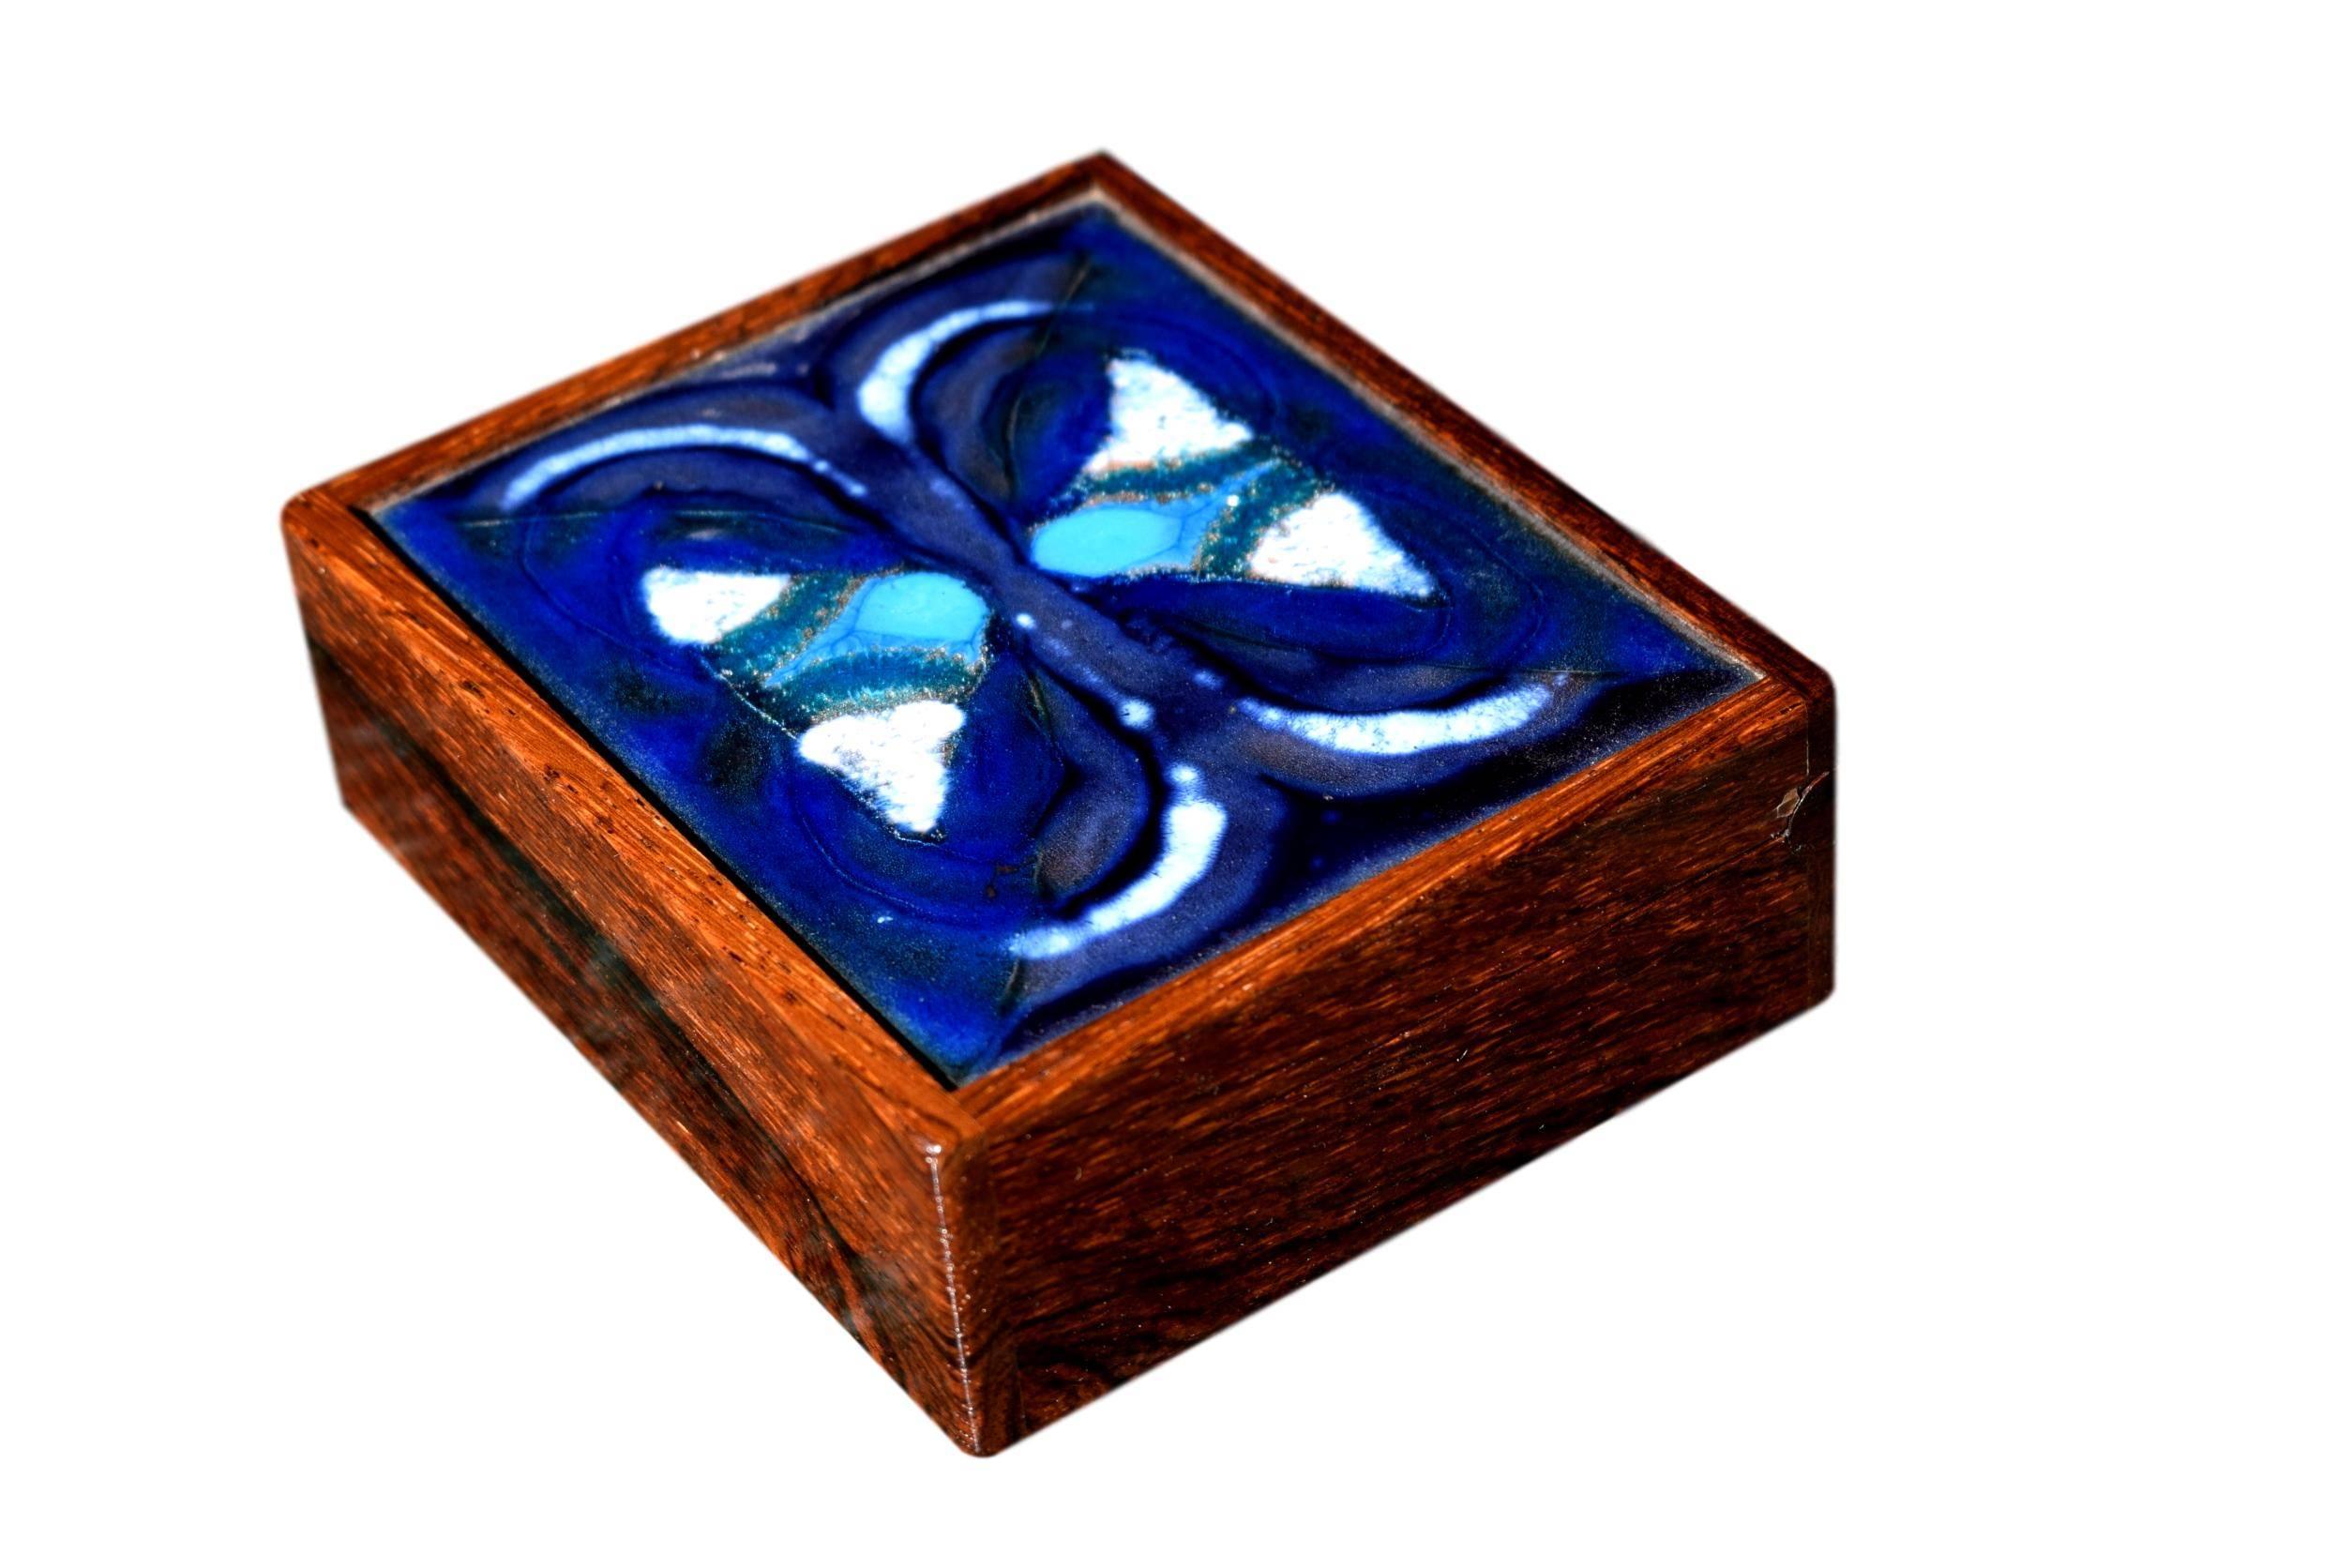 A Danish midcentury rosewood box with hidden hinges by Alfred Klitgaard with a decorative polychrome enamel by Danish artist Bodil Eje. 

Stamped 